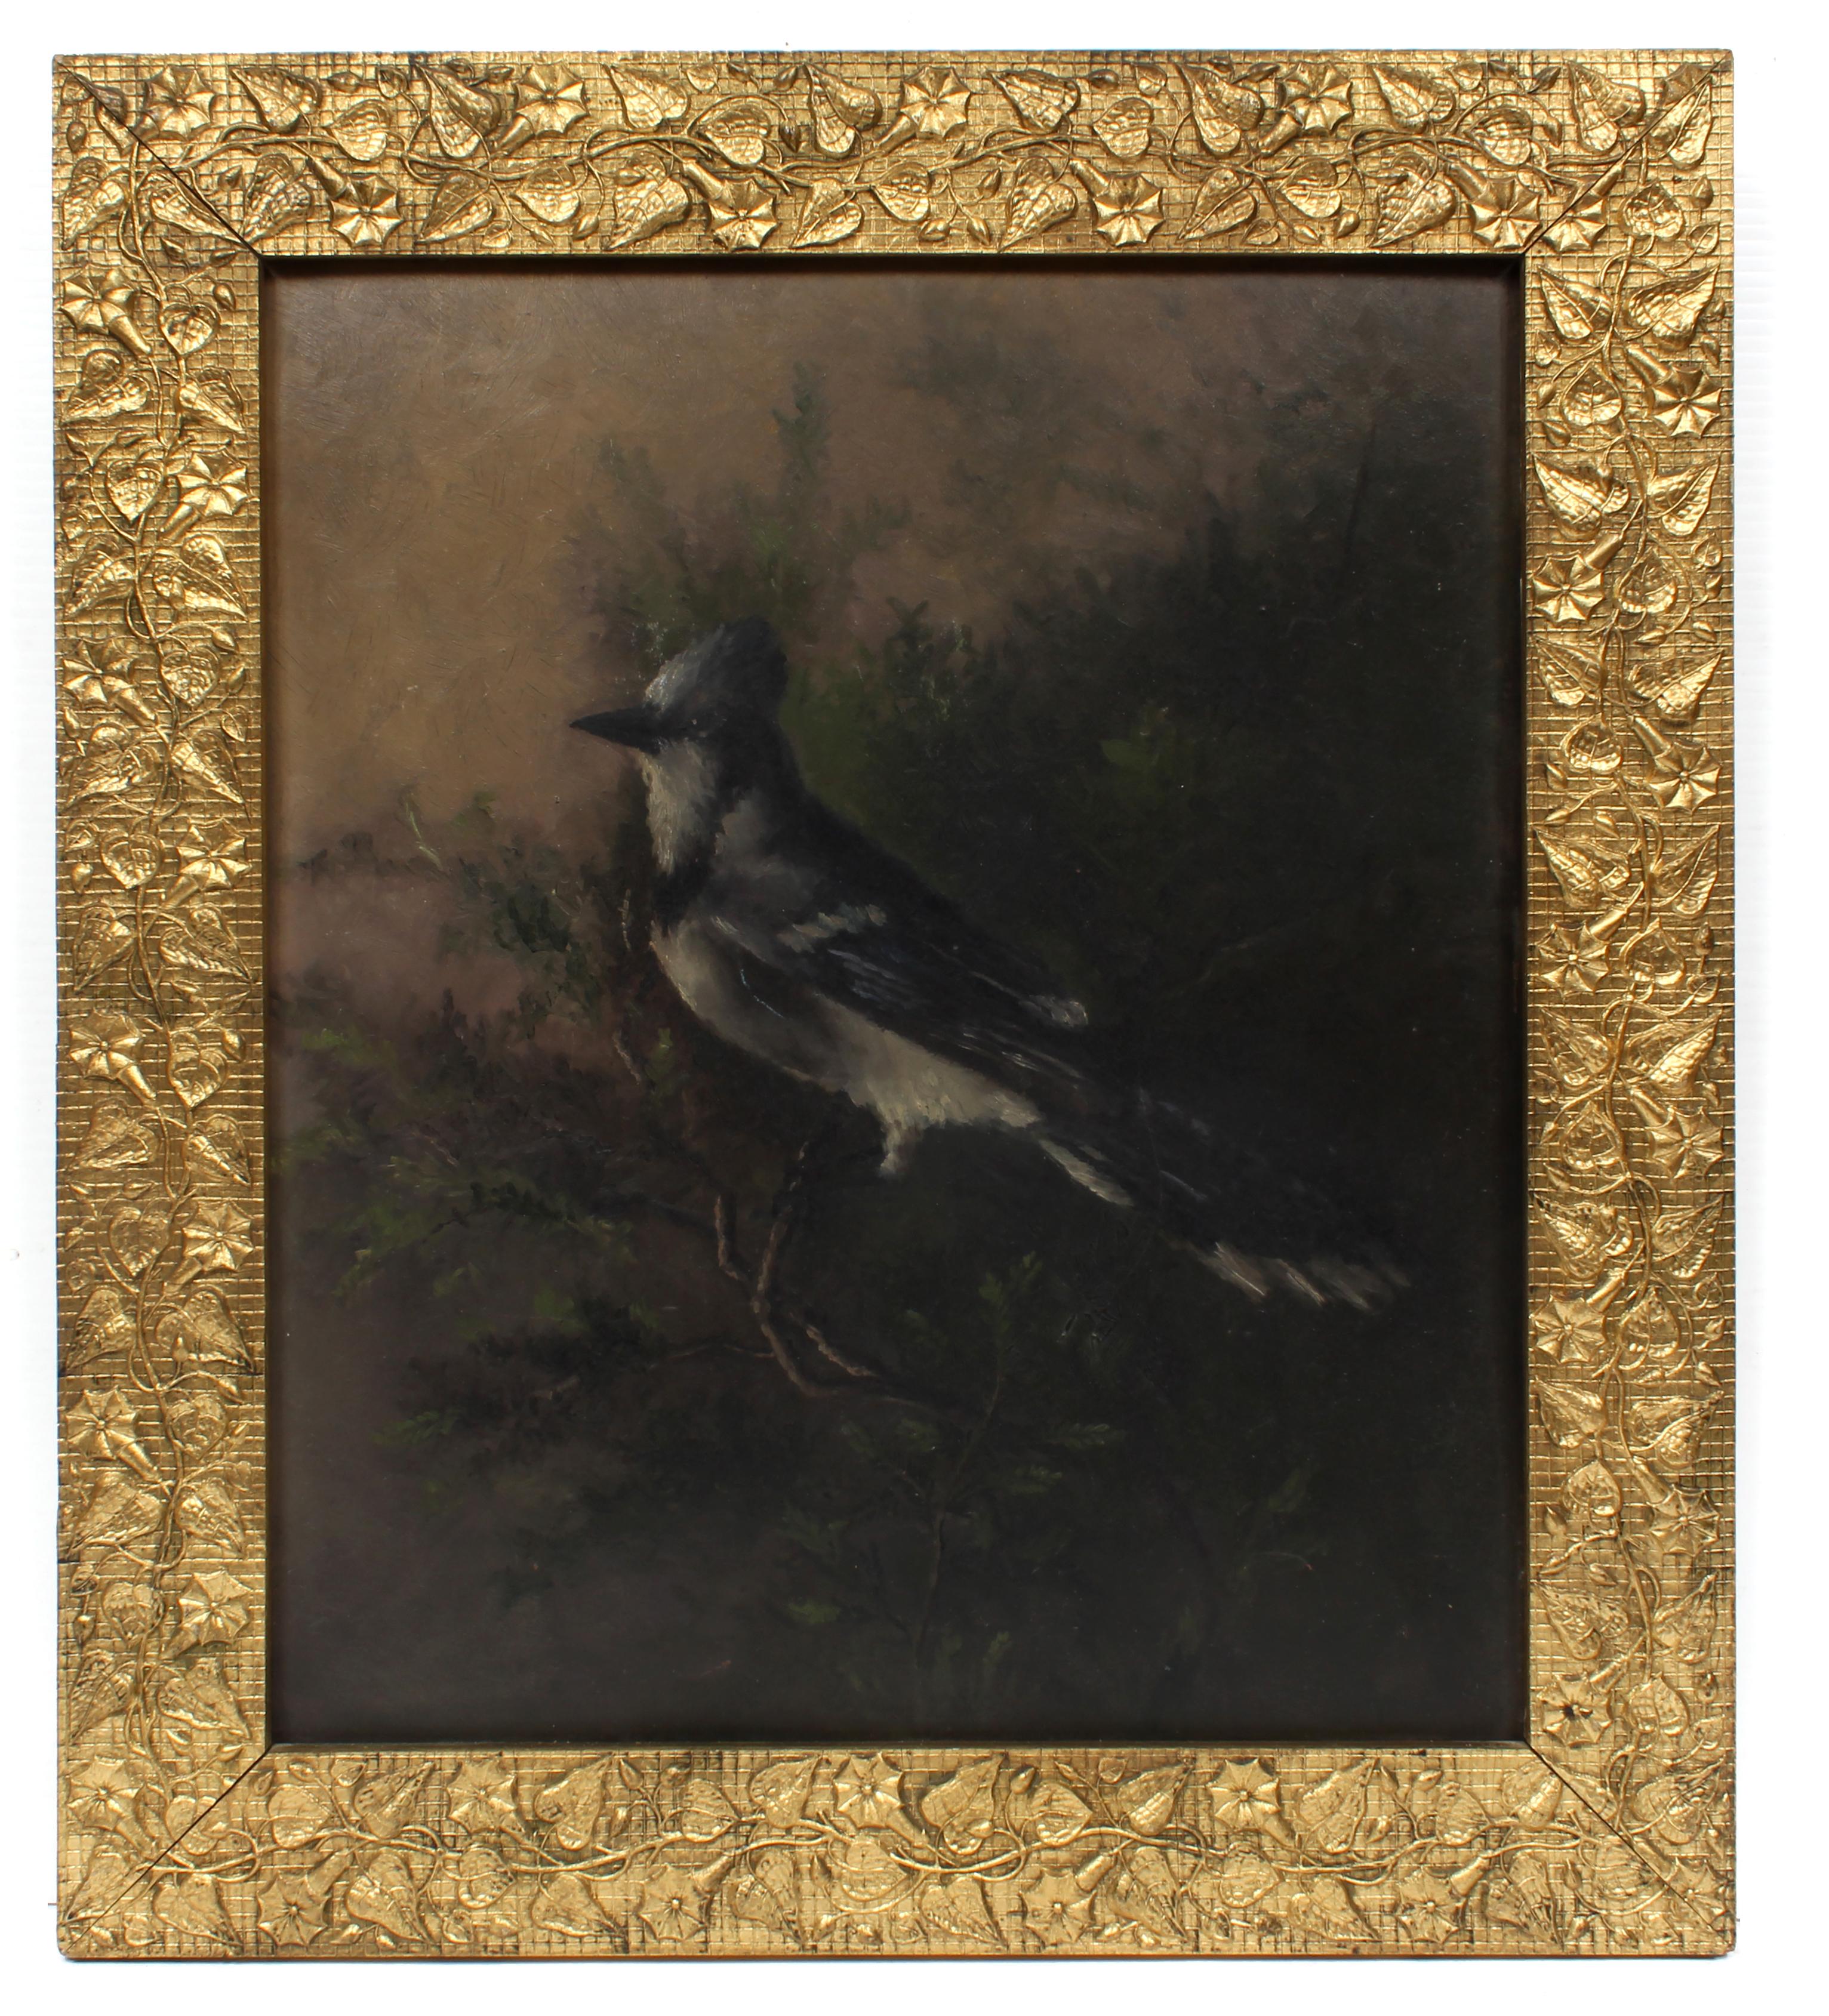 Unknown Figurative Painting - Antique American Realist Figurative Bird in Branch Blue Jay